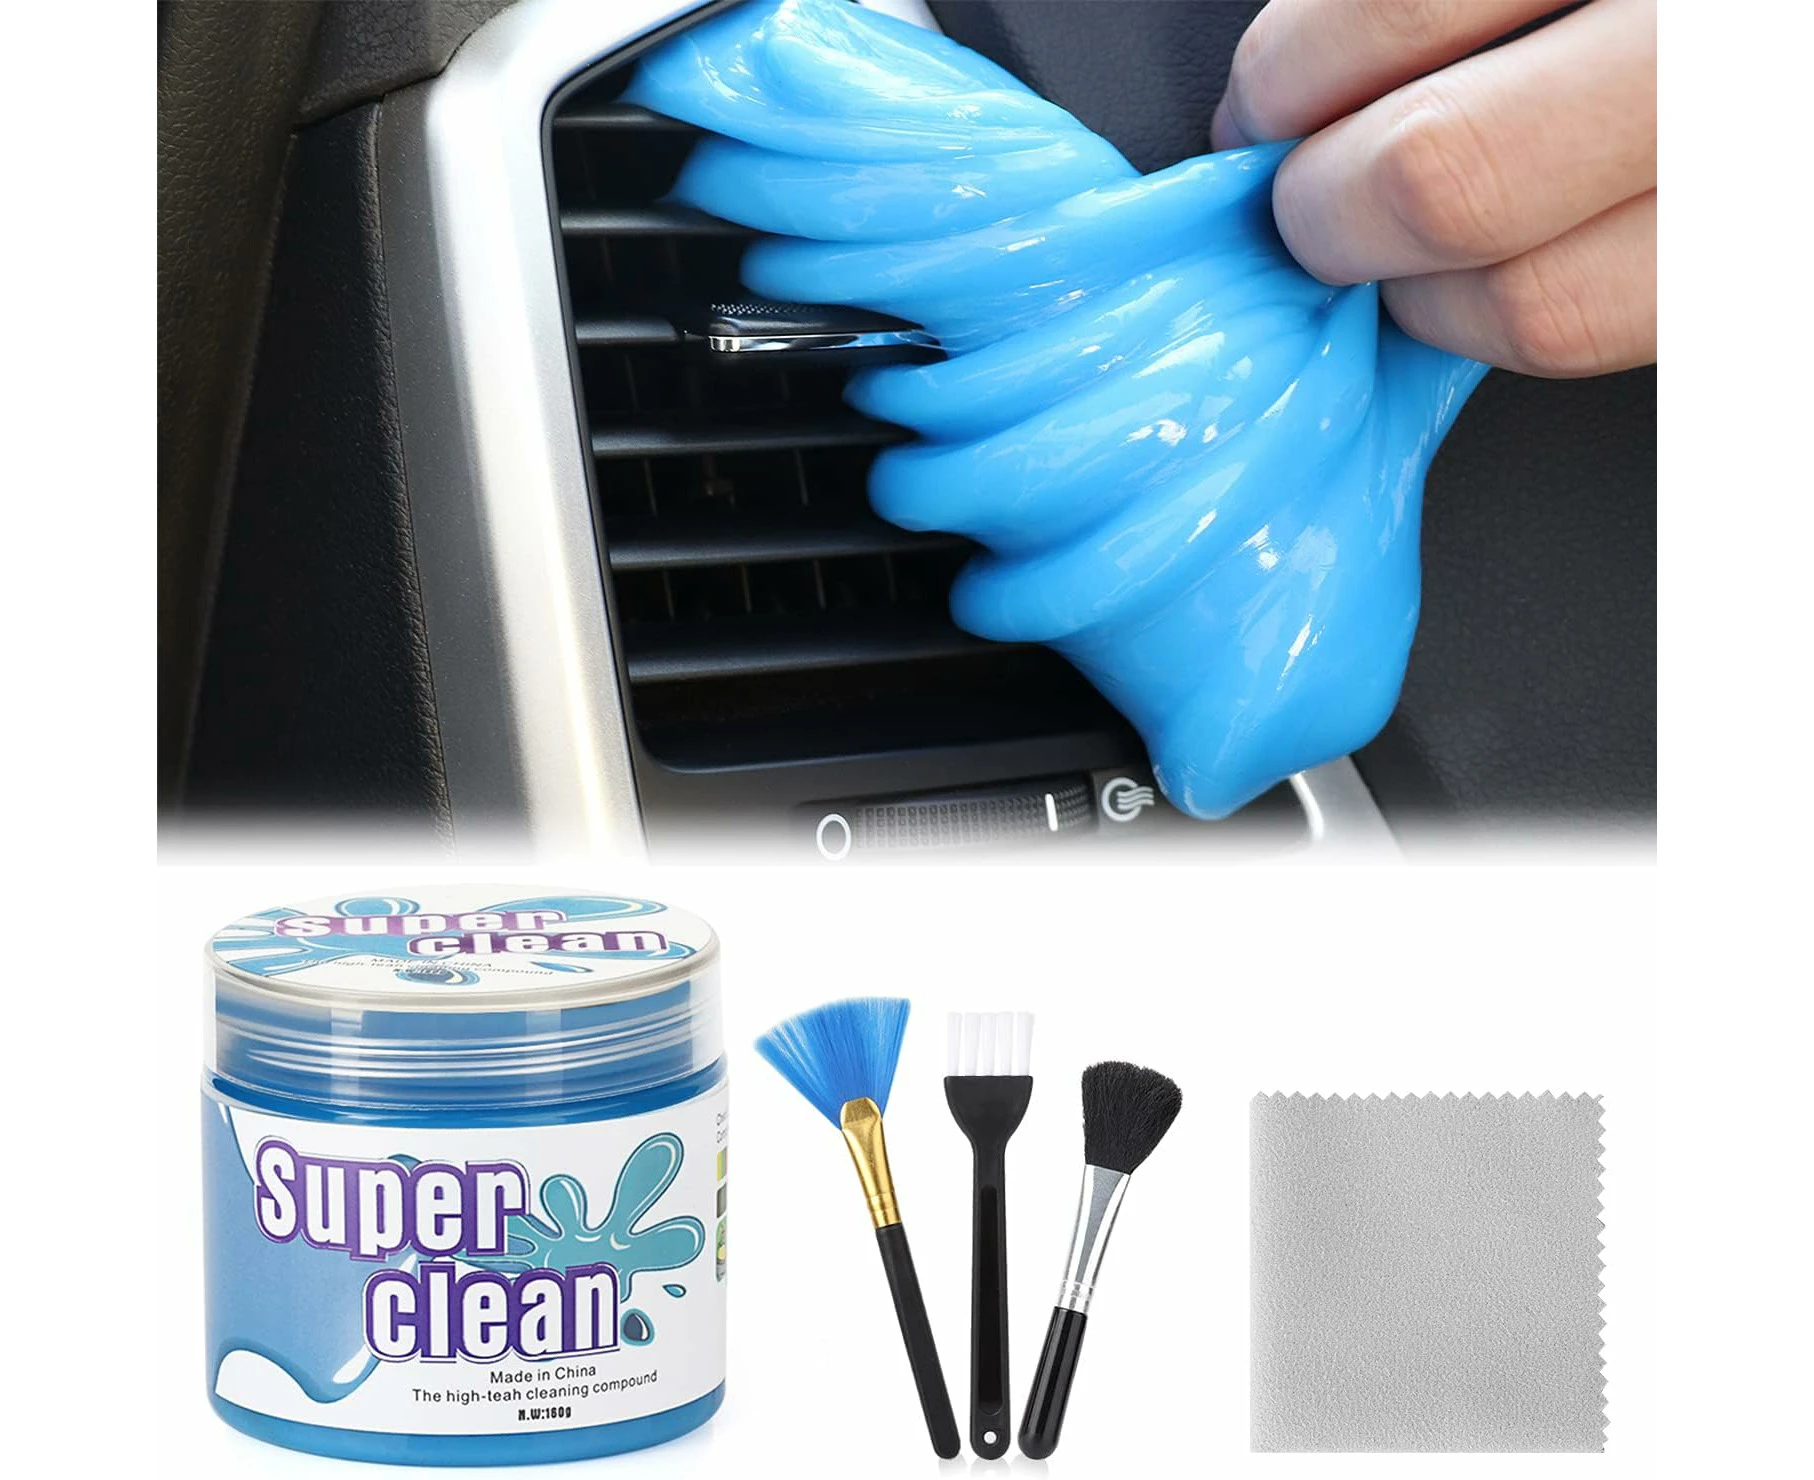 TOP 5: Best Cleaning Gel for Car Detailing  Keyboard, Vents, PC, Laptops,  Cameras 